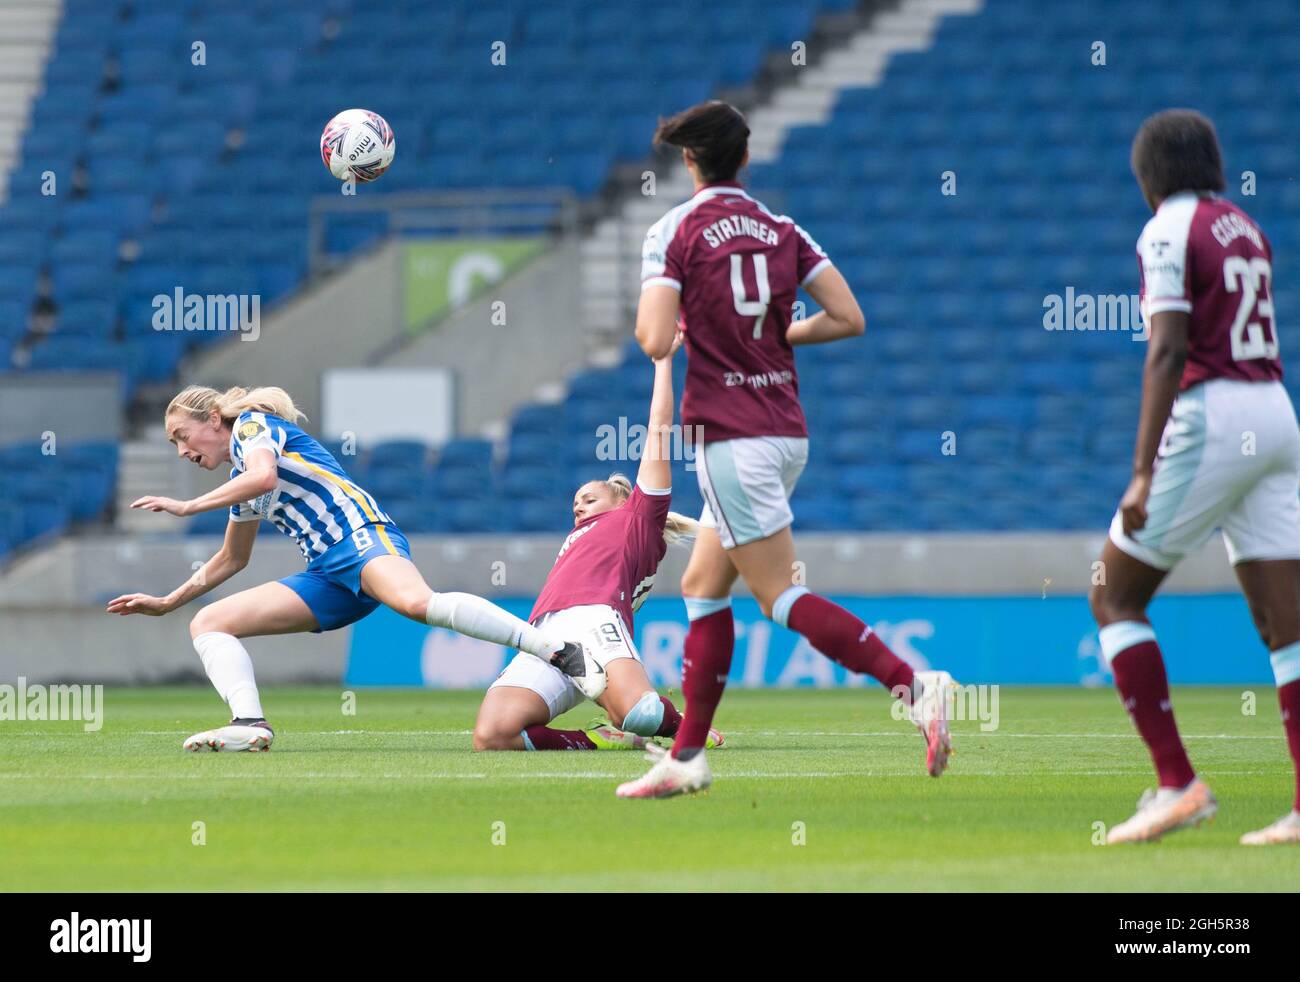 Brighton, UK. 05th Sep, 2021. Megan Connolly of Brighton and Hove Albion is fouled during the FA Women's Super League match between Brighton & Hove Albion Women and West Ham United Ladies at The Amex Stadium on September 5th 2021 in Brighton, United Kingdom. (Photo by Jeff Mood/phcimages.com) Credit: PHC Images/Alamy Live News Stock Photo